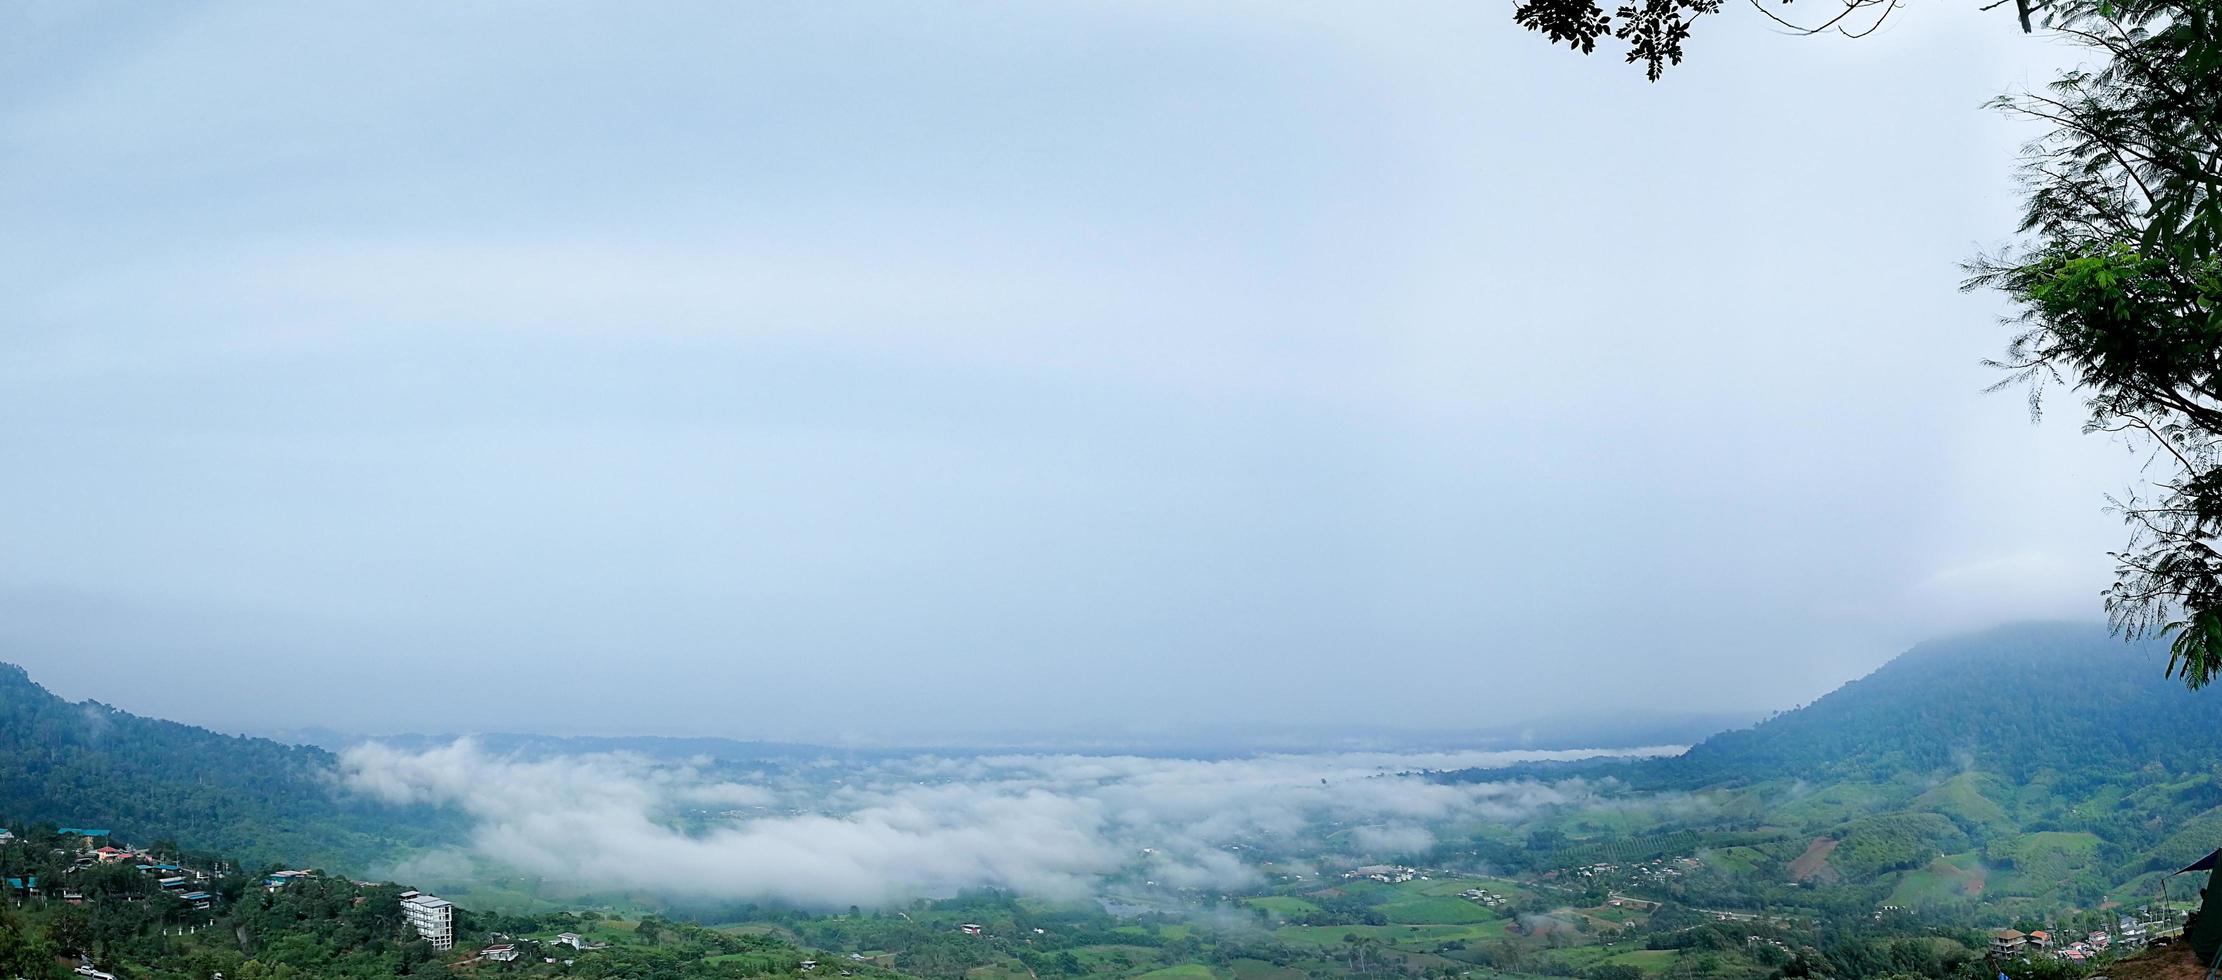 Panorama image on mountains and foggy gorges In the early morning the scenery at Khao Kho Viewpoint, Phetchabun Province, Thailand photo